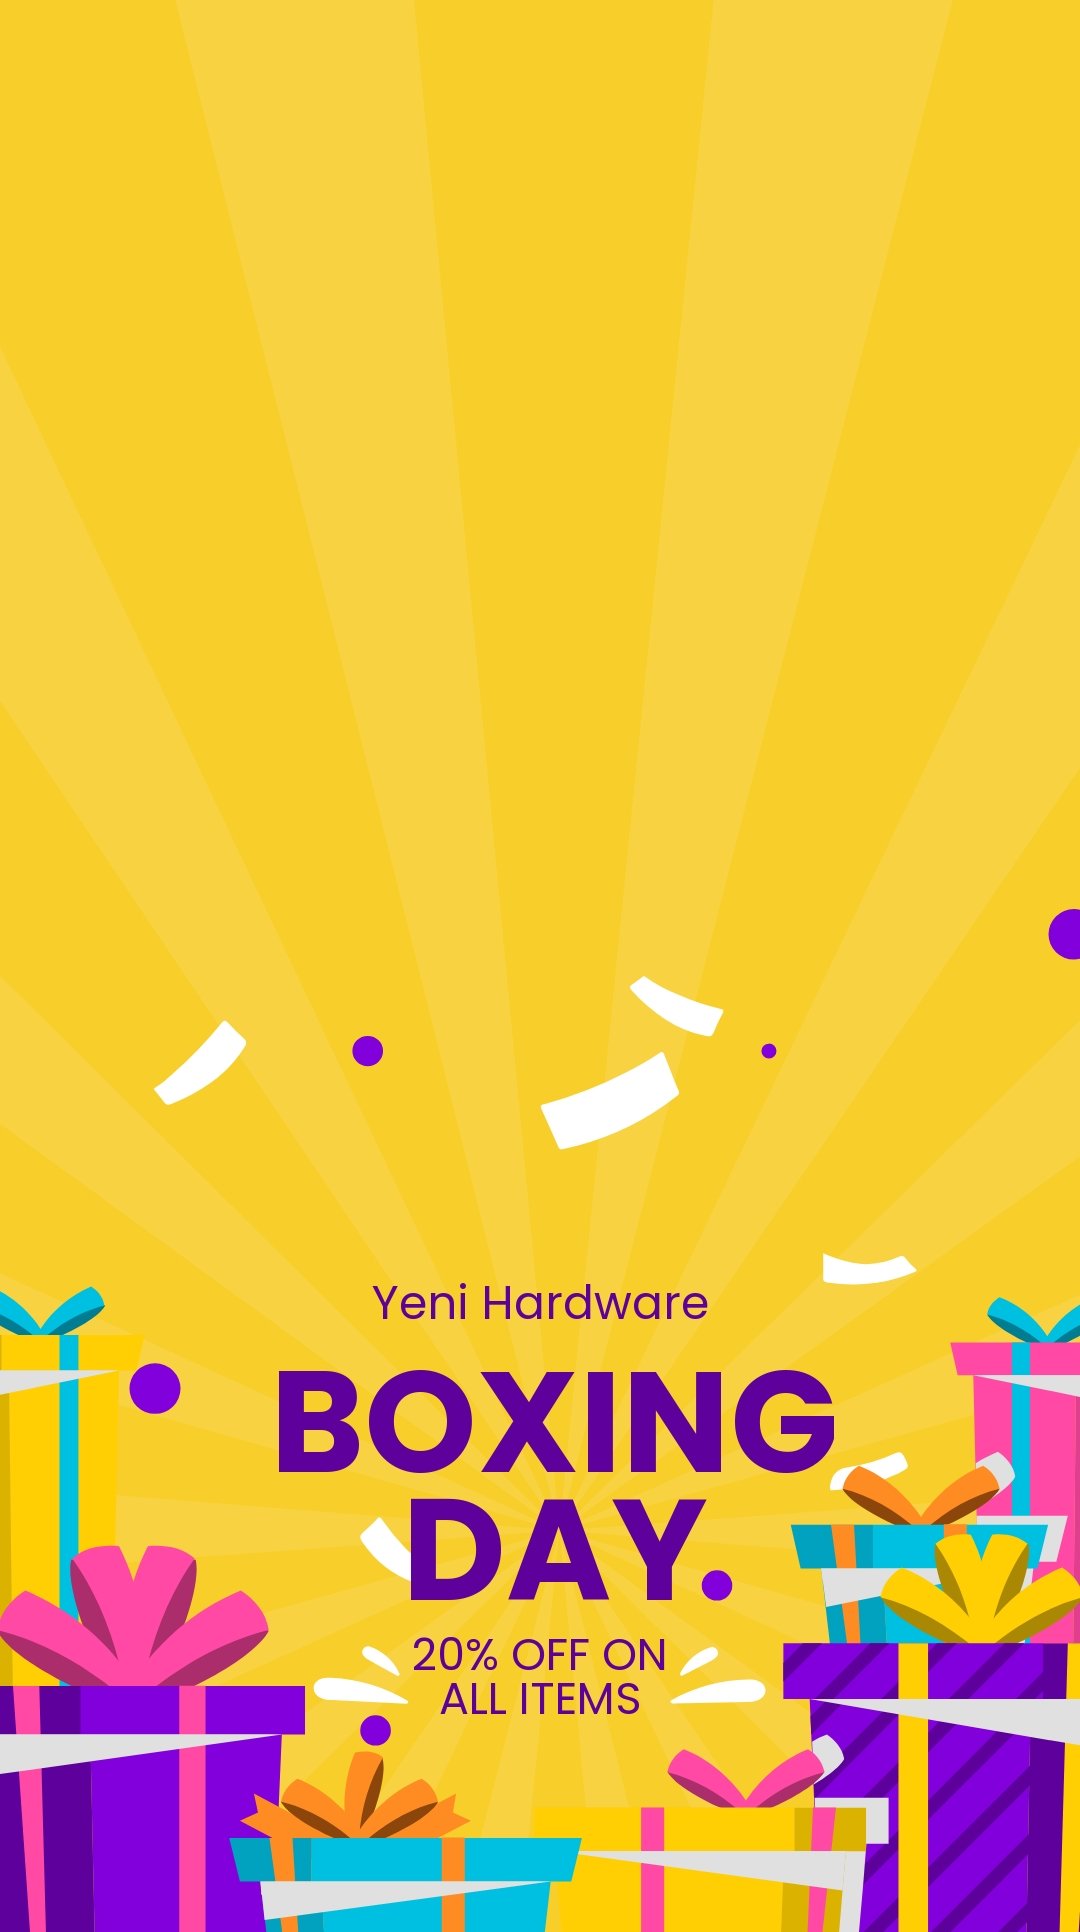 Free Boxing Day Promotion Snapchat Geofilter Template